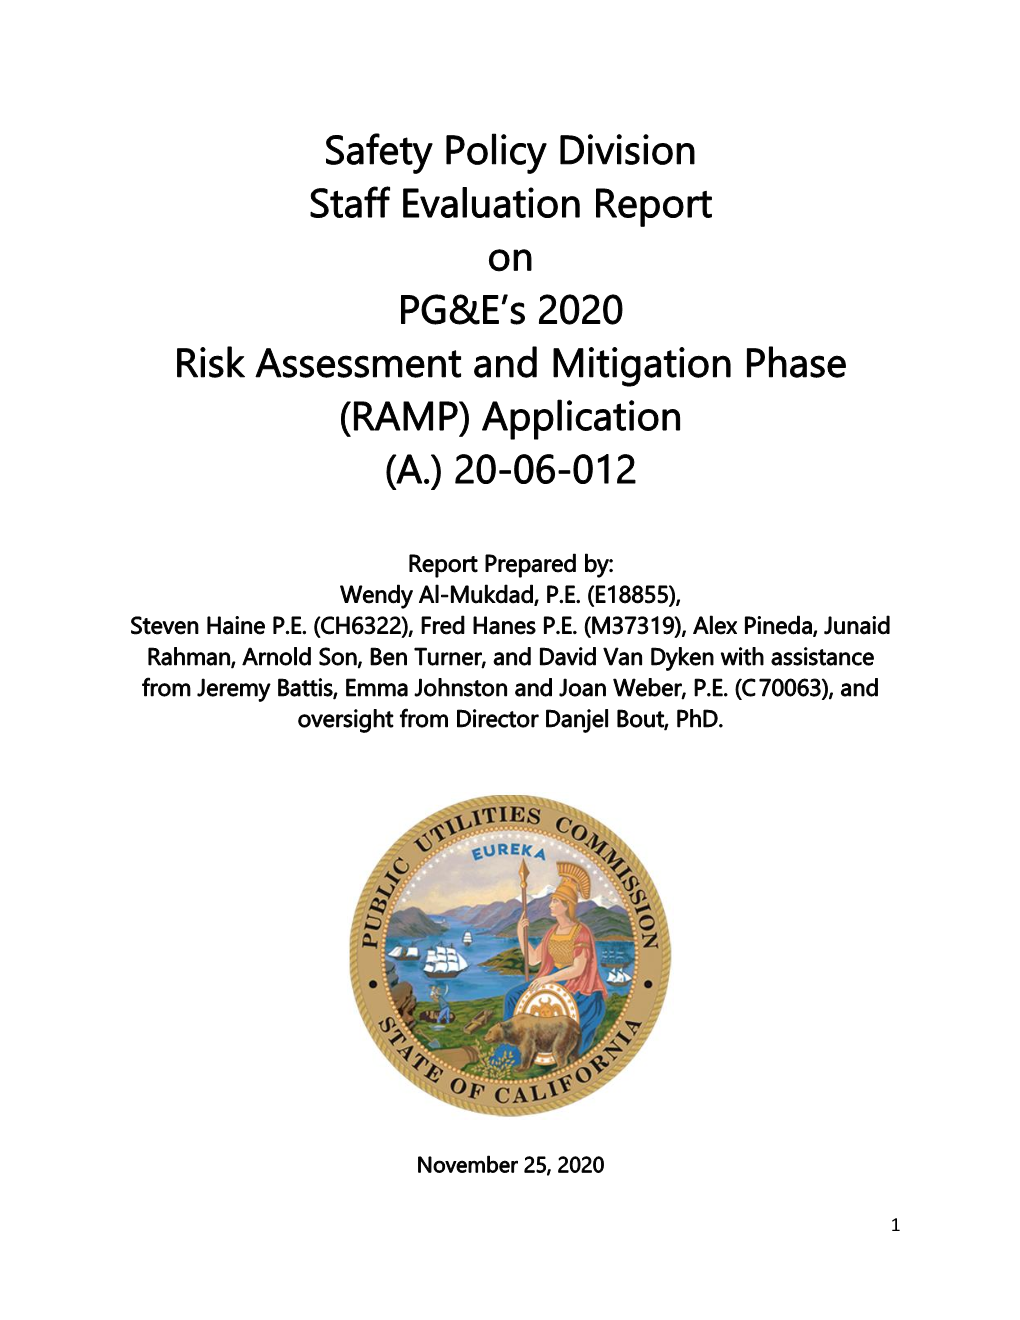 Safety Policy Division Staff Evaluation Report on PG&E's 2020 Risk